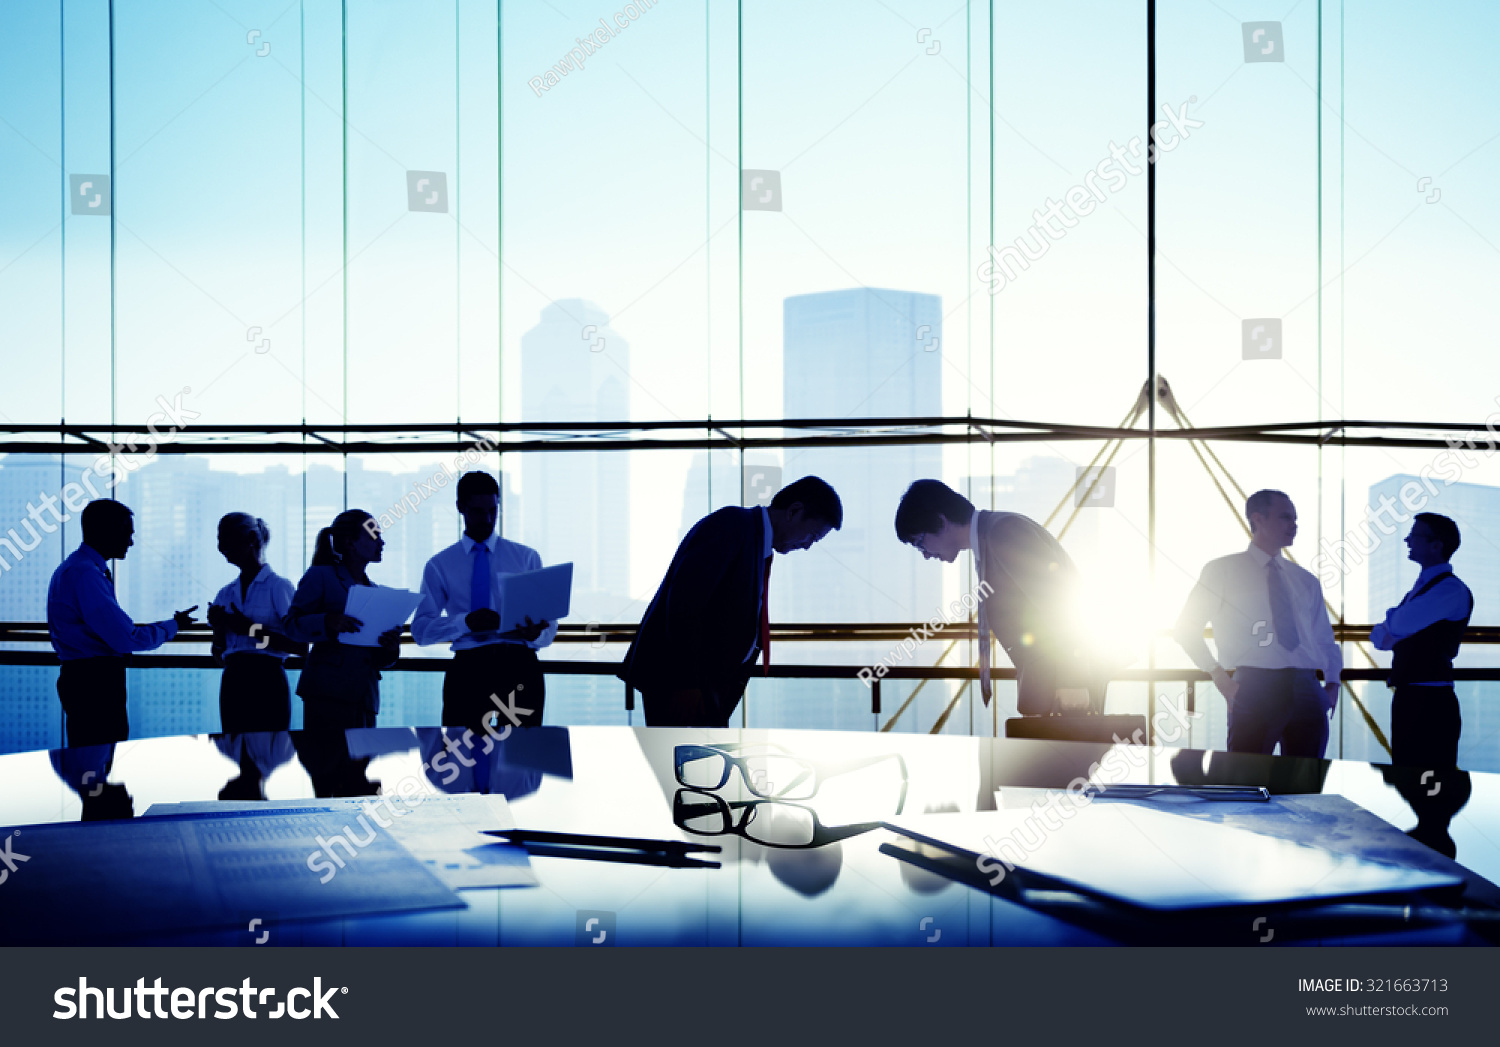 Business People Meeting Bowing Japanese Culture Concept #321663713